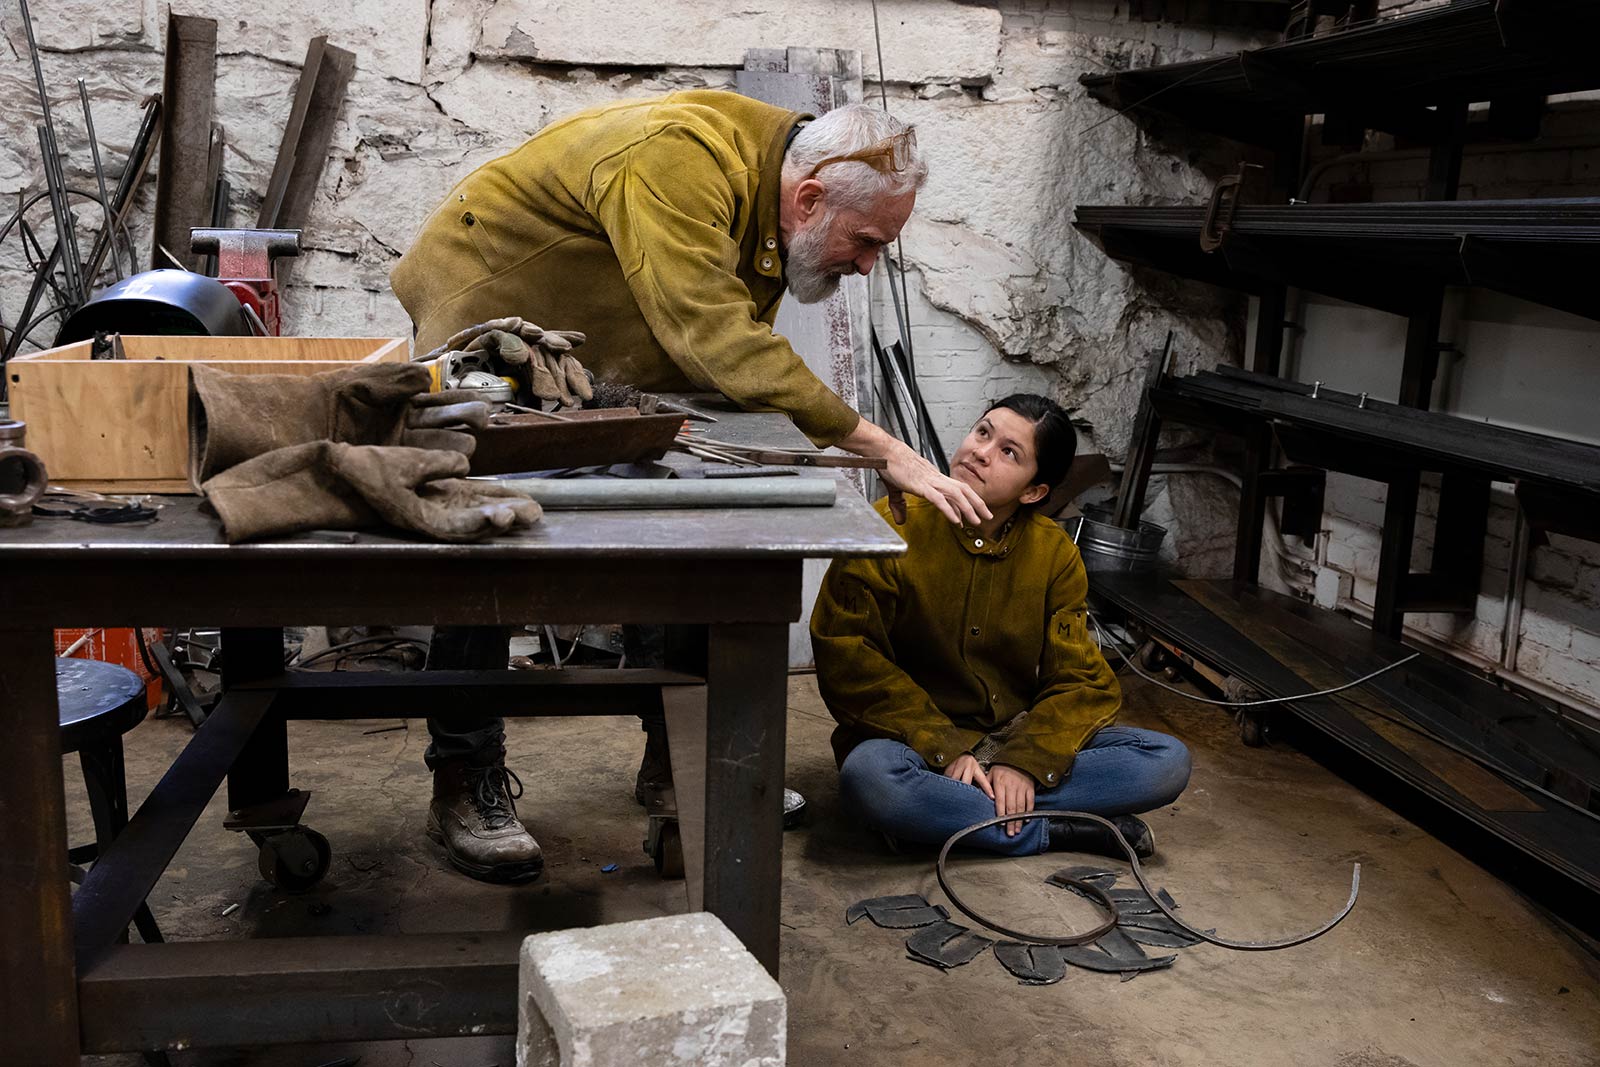 Professor Culhane instructs a student in his sculpture class